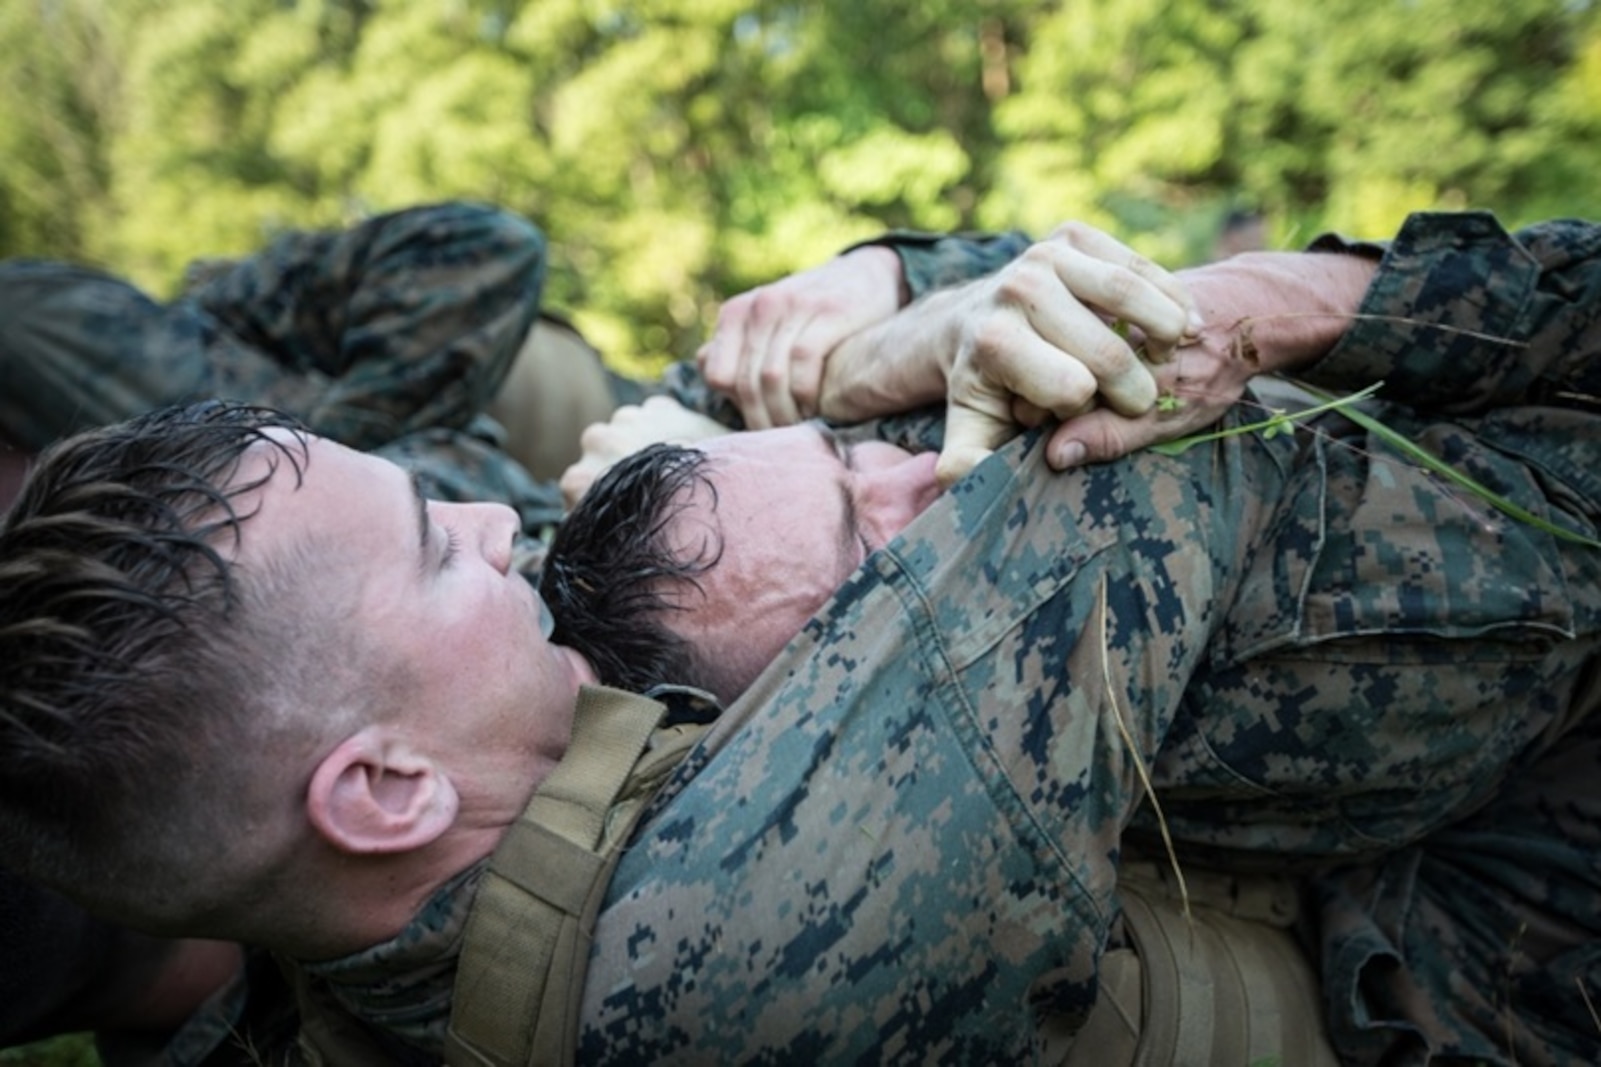 U.S. Marines participate in ground free sparring during the culminating event of the Martial Arts Instructor Trainer course aboard Marine Corps Base Quantico, VA., June 21, 2017.